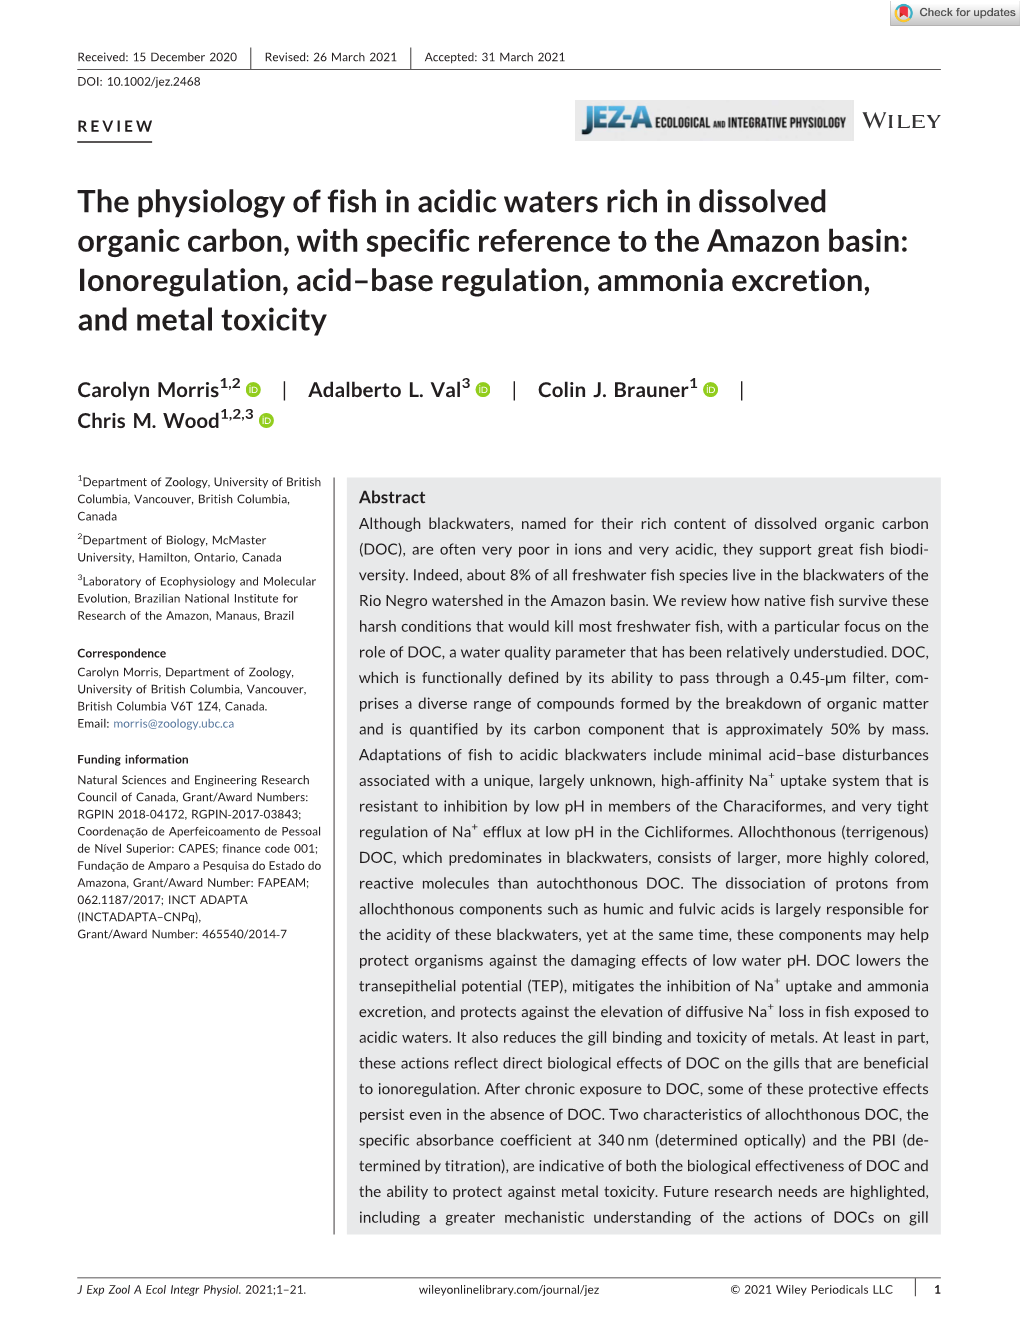 The Physiology of Fish in Acidic Waters Rich in Dissolved